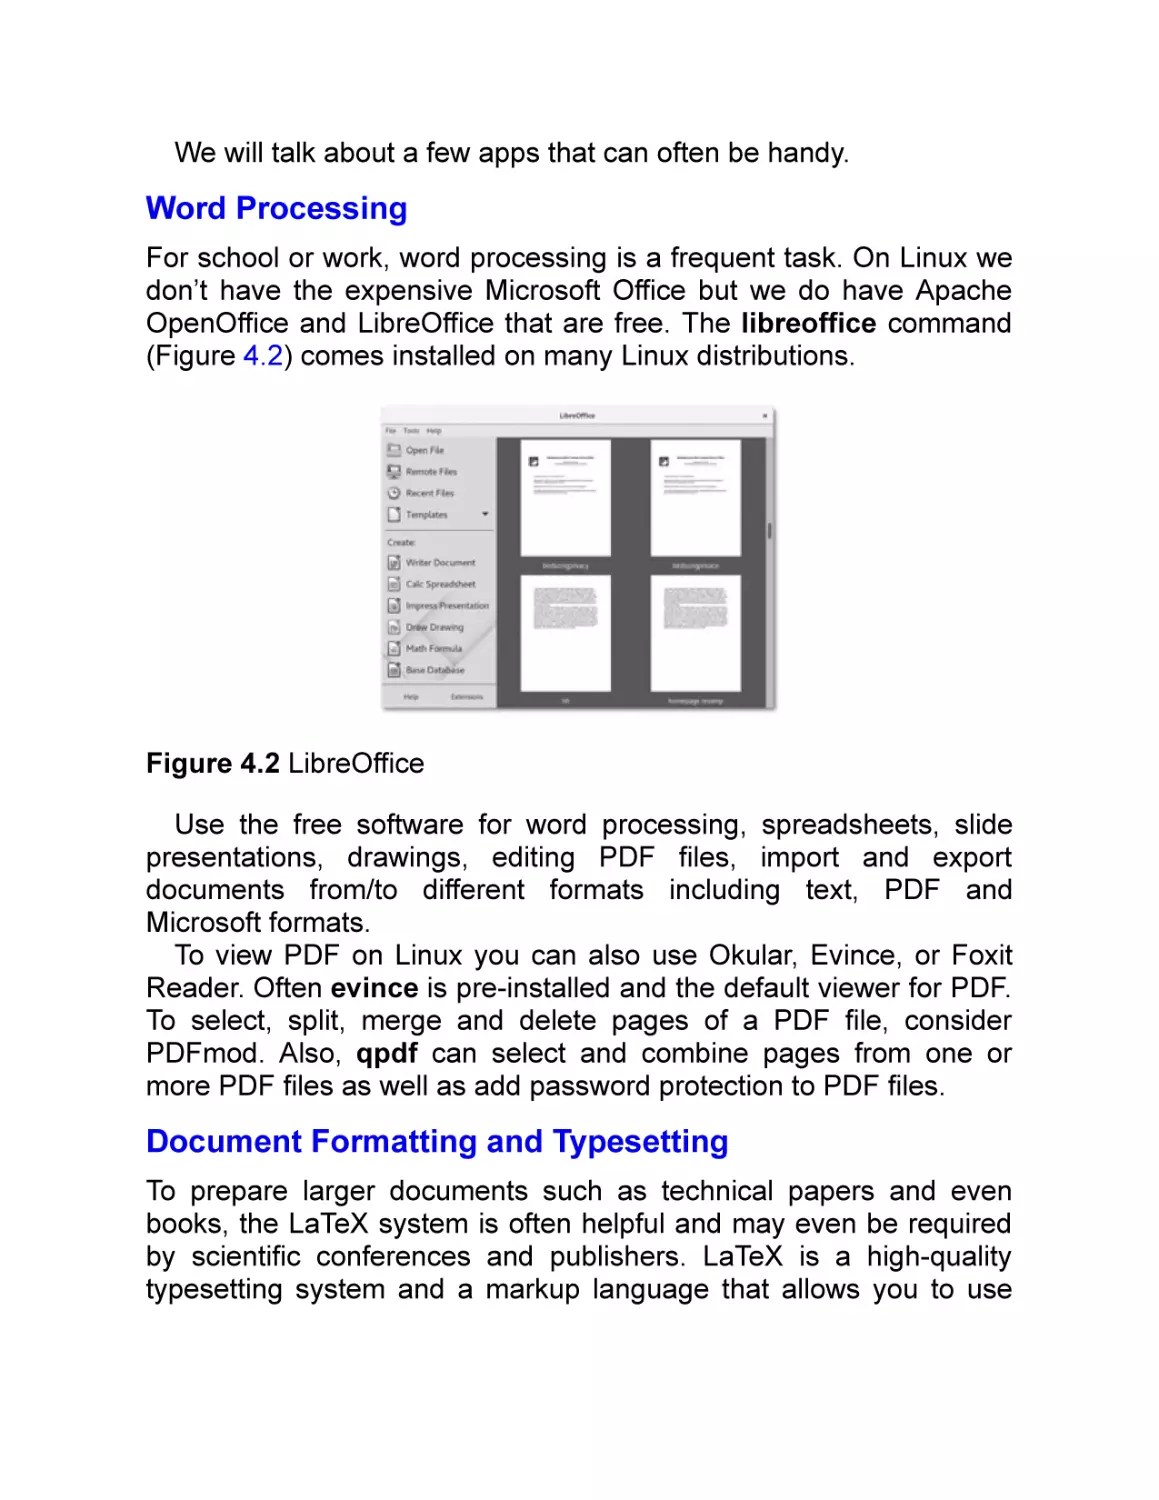 Word Processing
Document Formatting and Typesetting